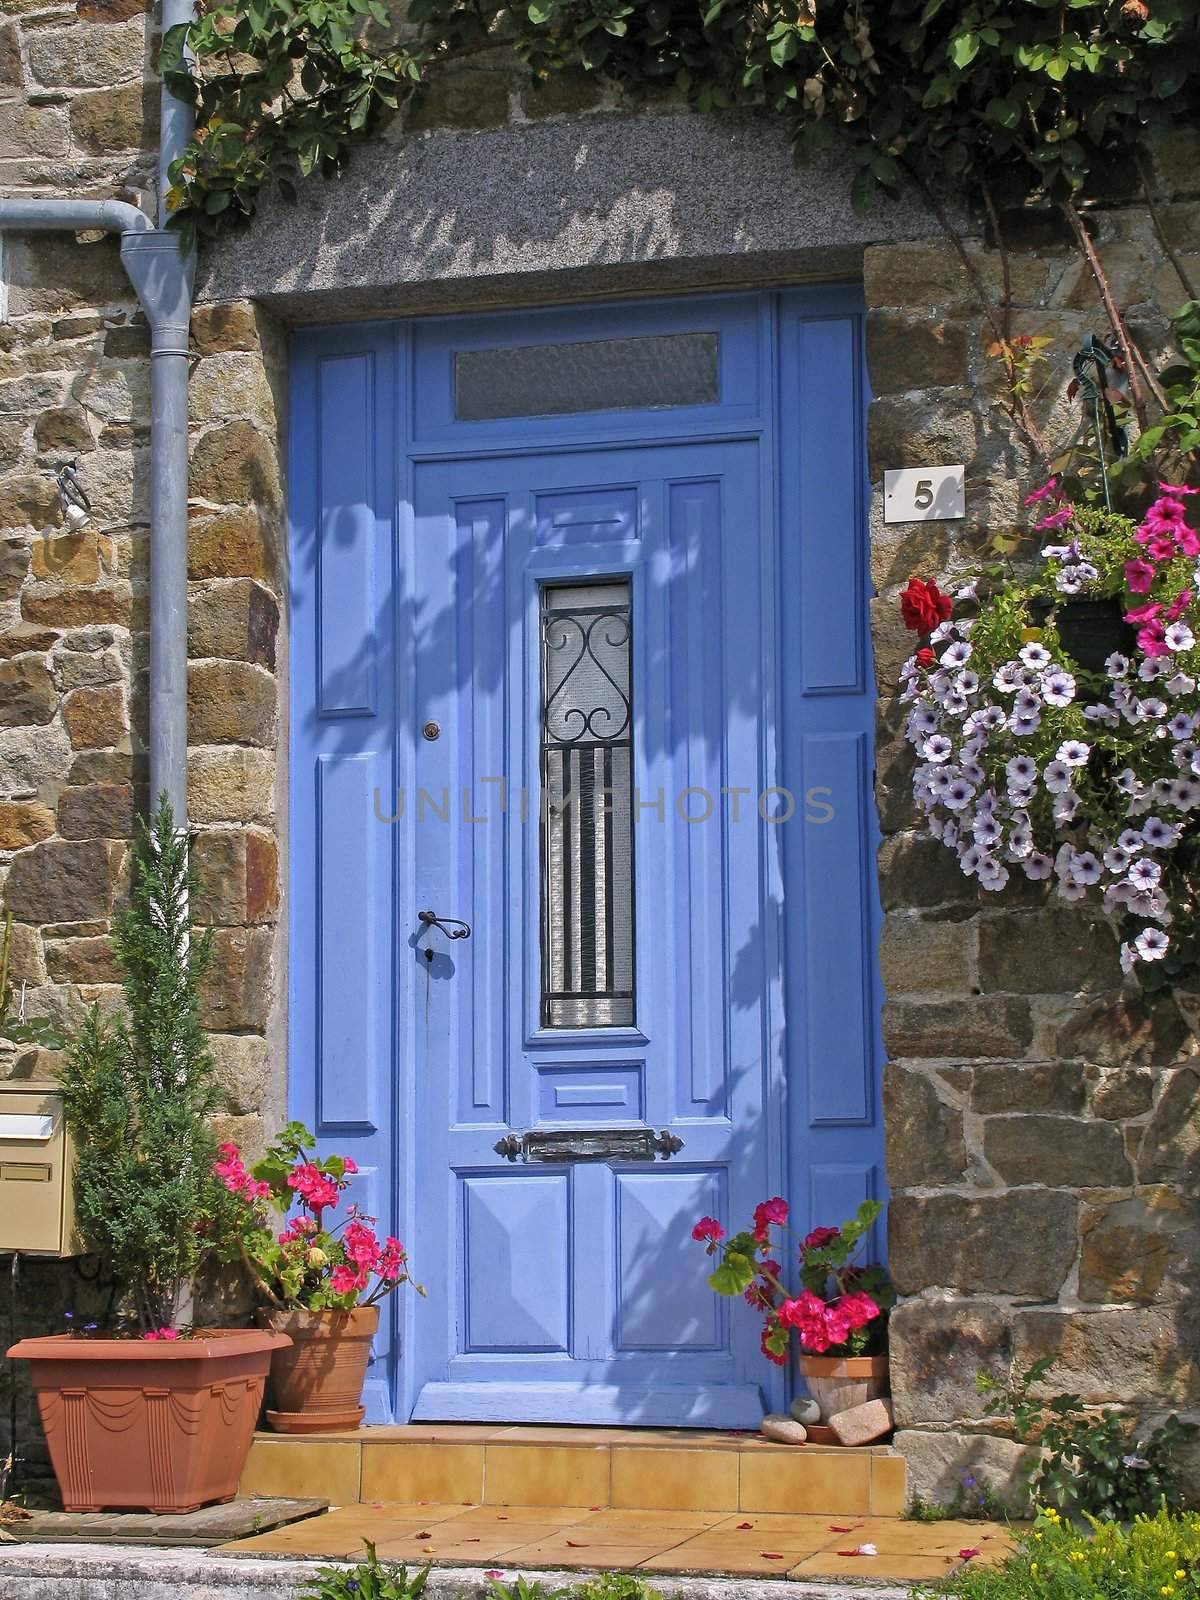 A blue door near Le Vivieur, Brittany, in the North of France.